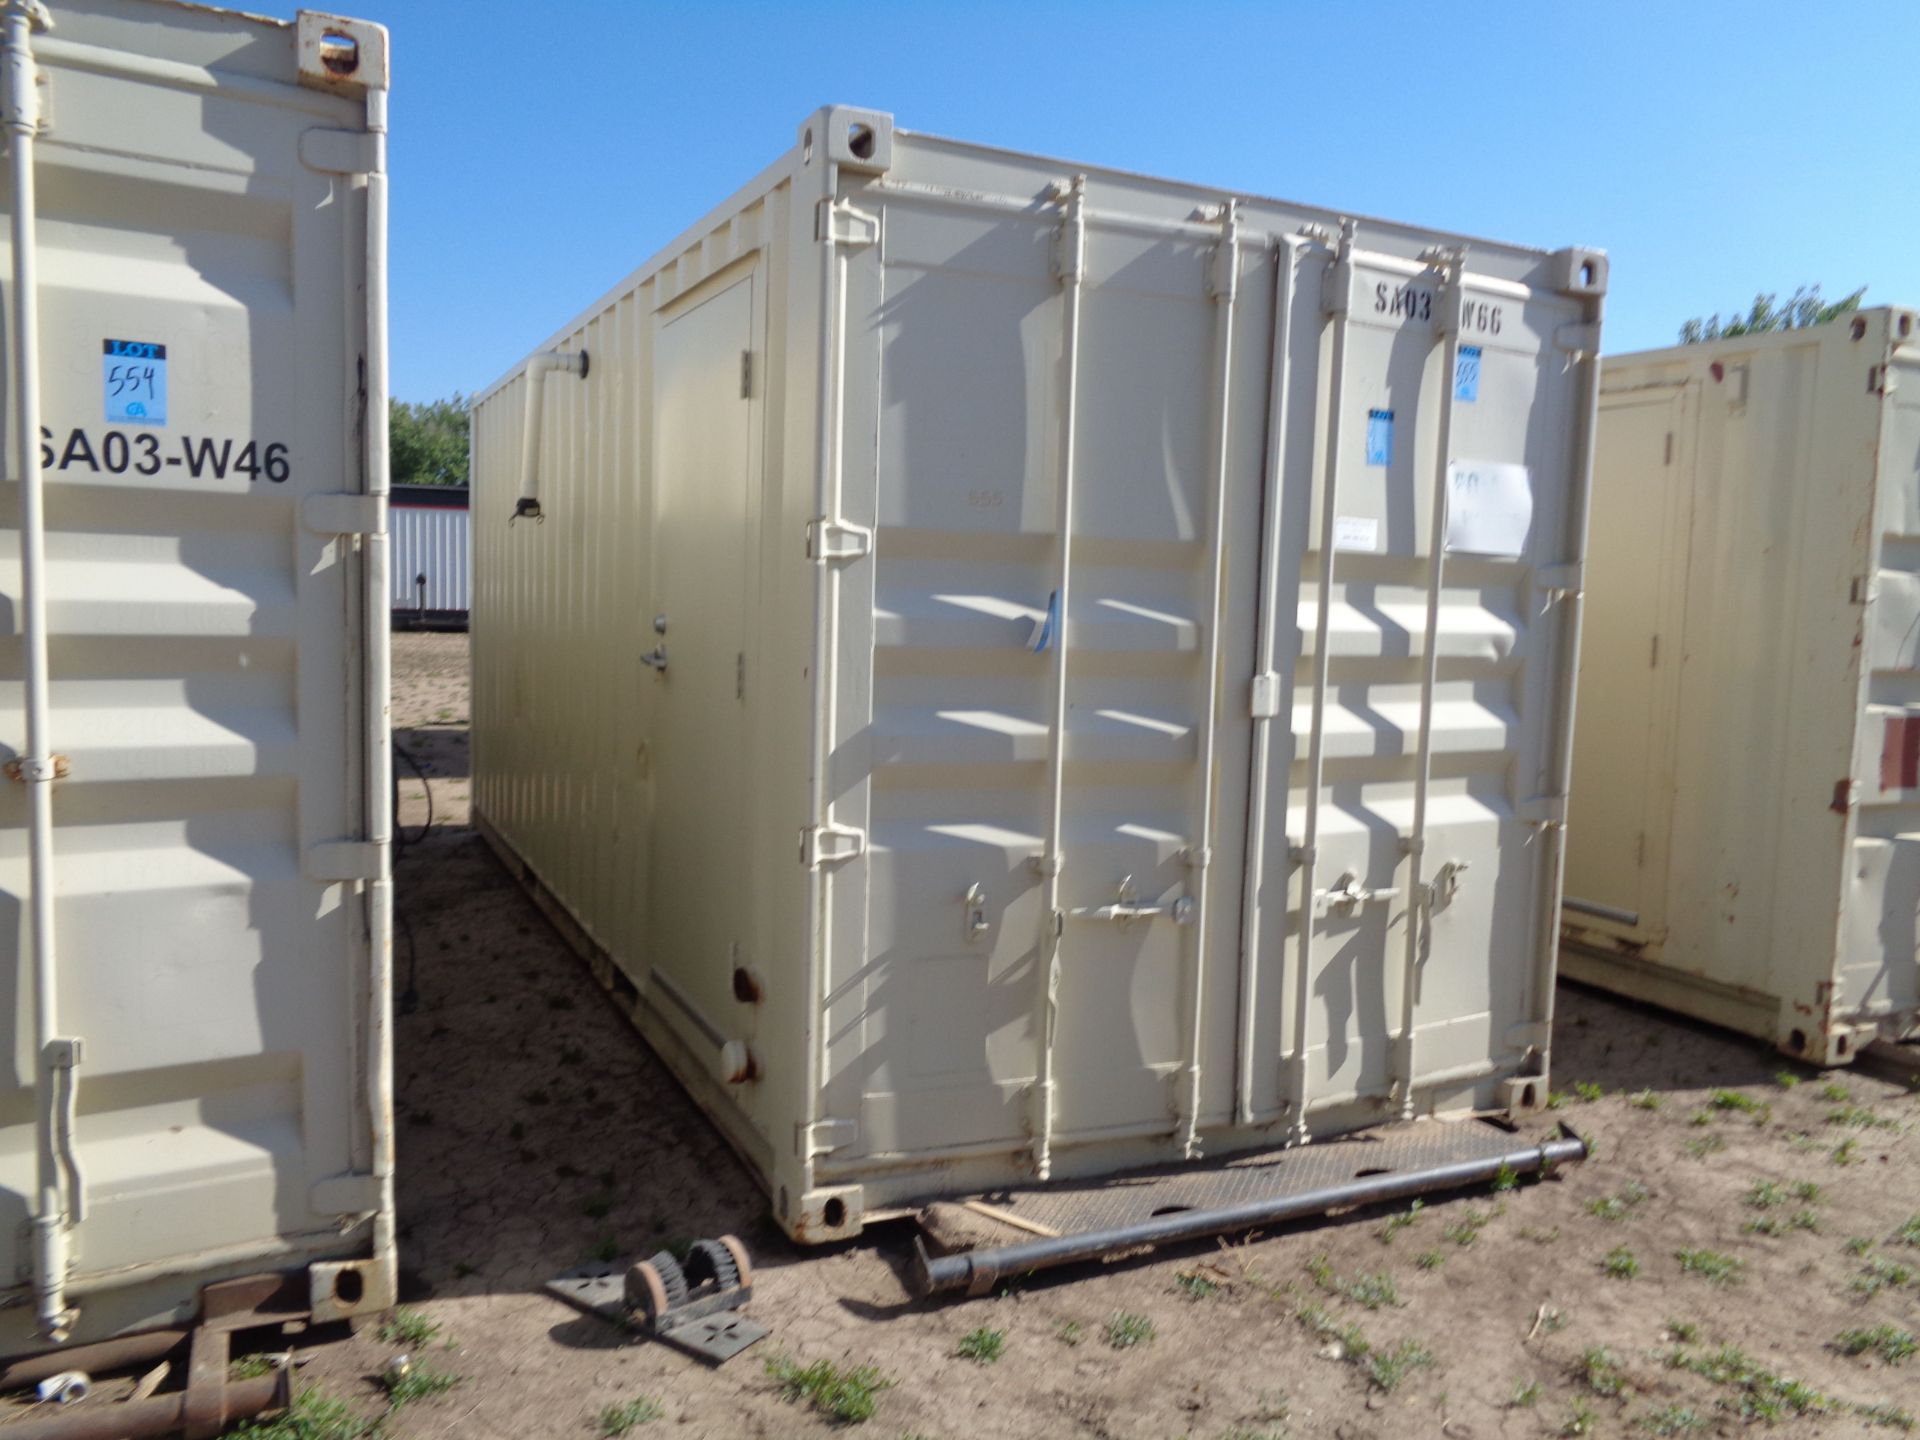 CONVENTIONAL 8' X 20' CONEX TYPE STORAGE CONTAINERS WITH 3,500 GALLON PLASTIC WATER HOLDING TANK;